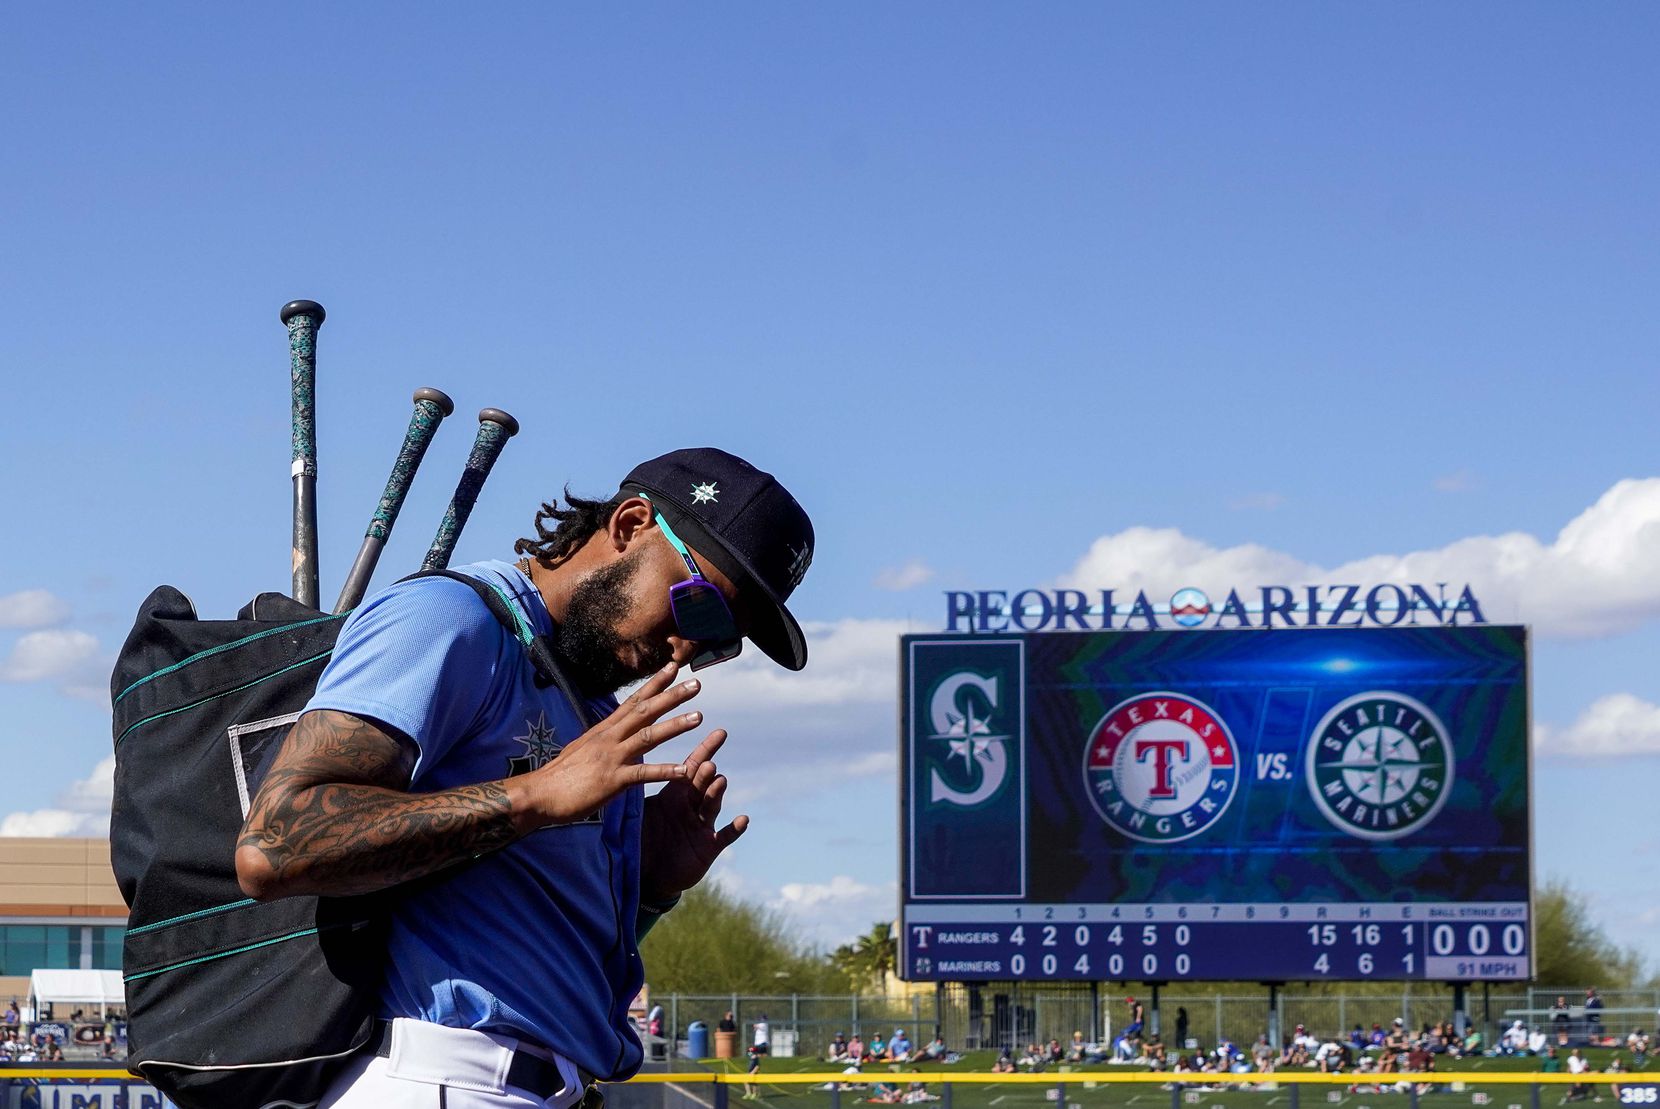 Seattle Mariners shortstop J.P. Crawford acknowledges cheers from fans as he leaves the field after the sixth inning of a spring training game against the Texas Rangers at Peoria Sports Complex on Wednesday, March 10, 2021, in Peoria, Ariz.